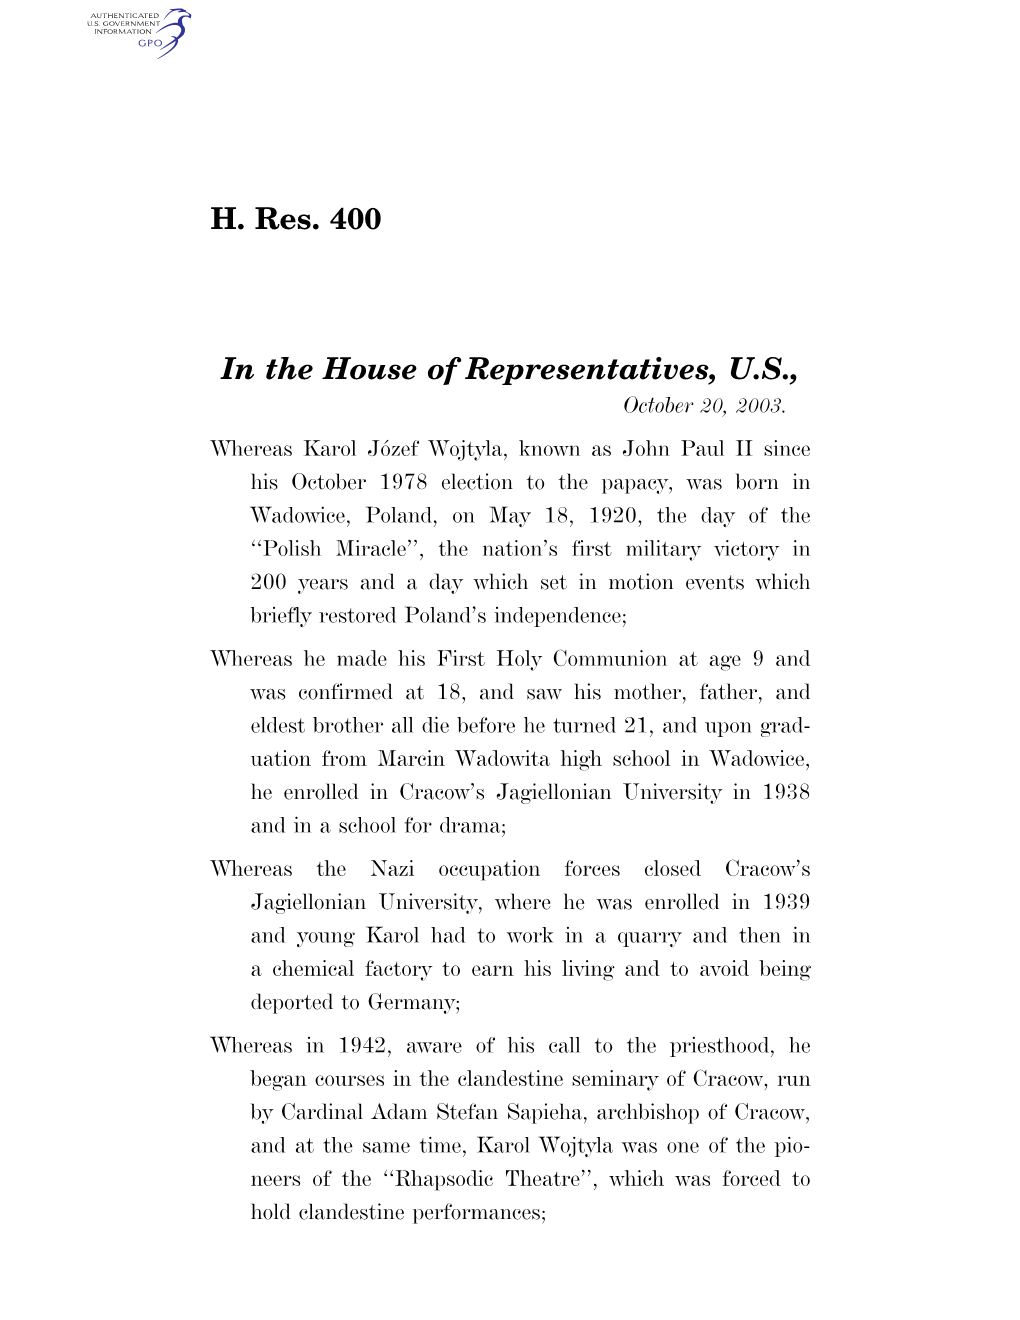 H. Res. 400 in the House of Representatives, U.S